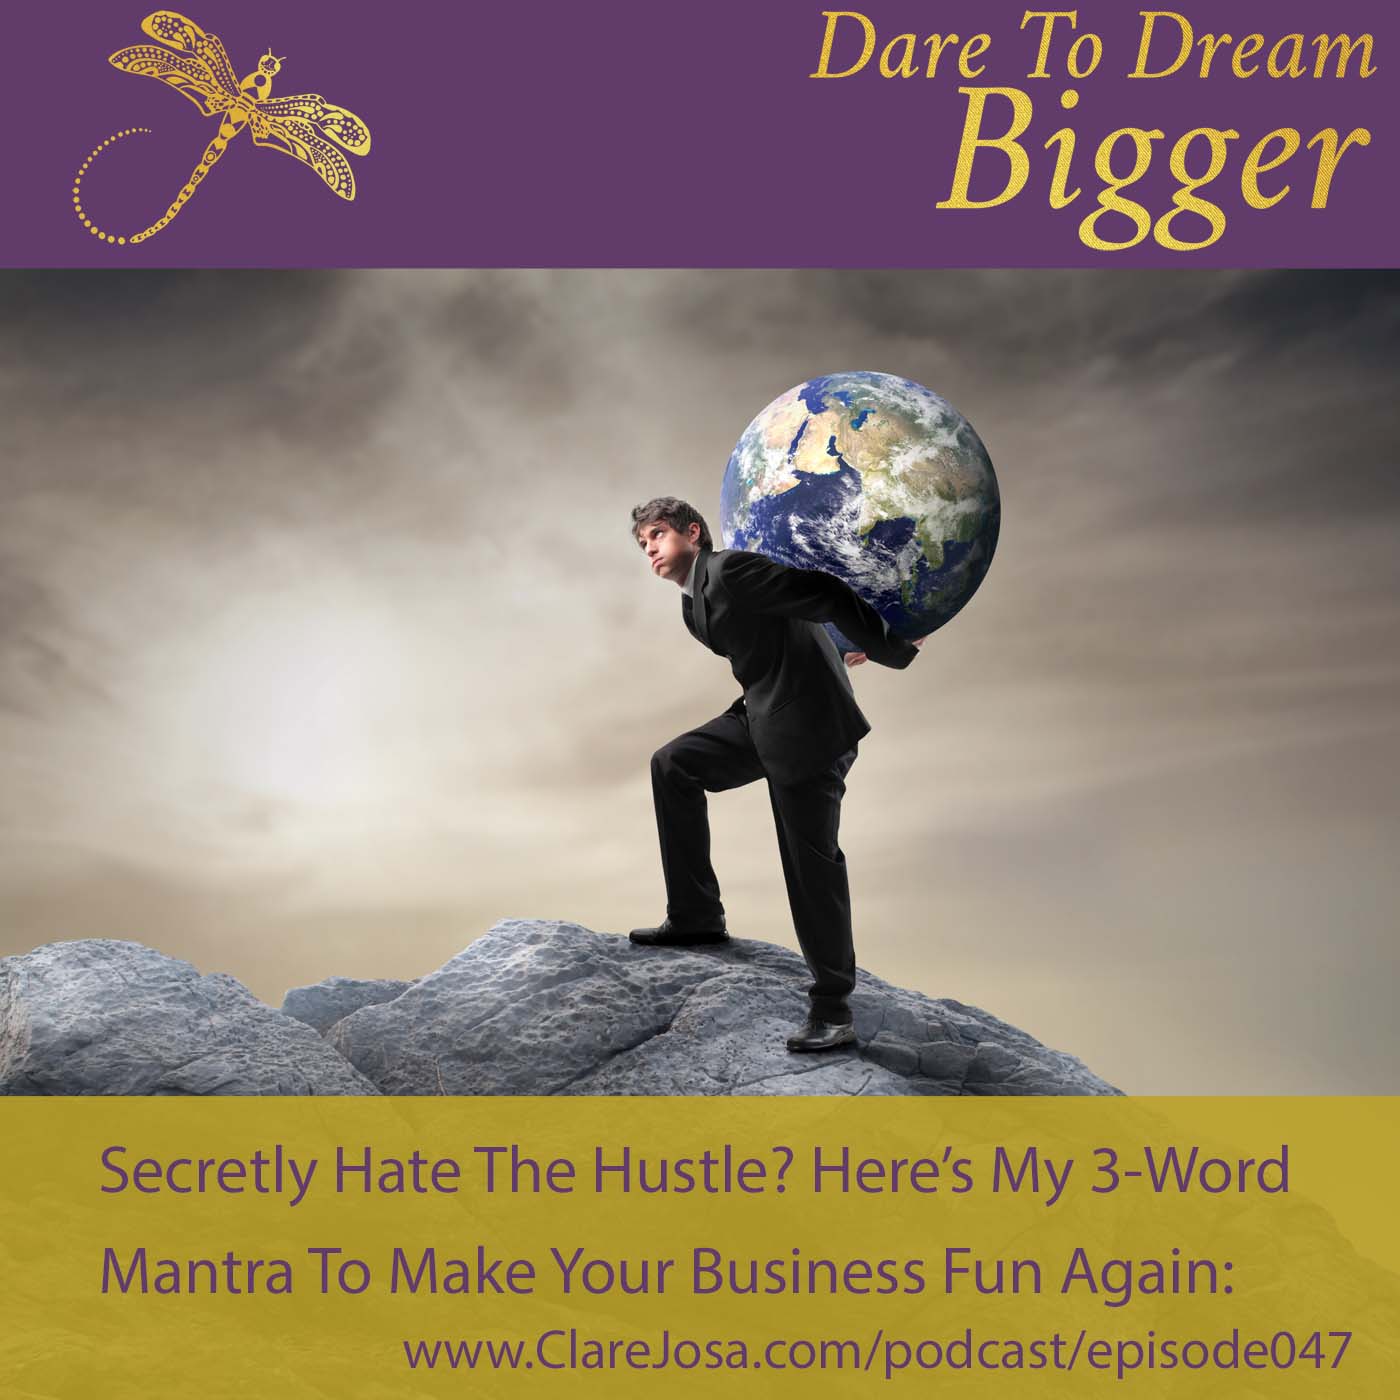 Secretly hate the hustle? Here's my 3-word mantra to make your business fun again!